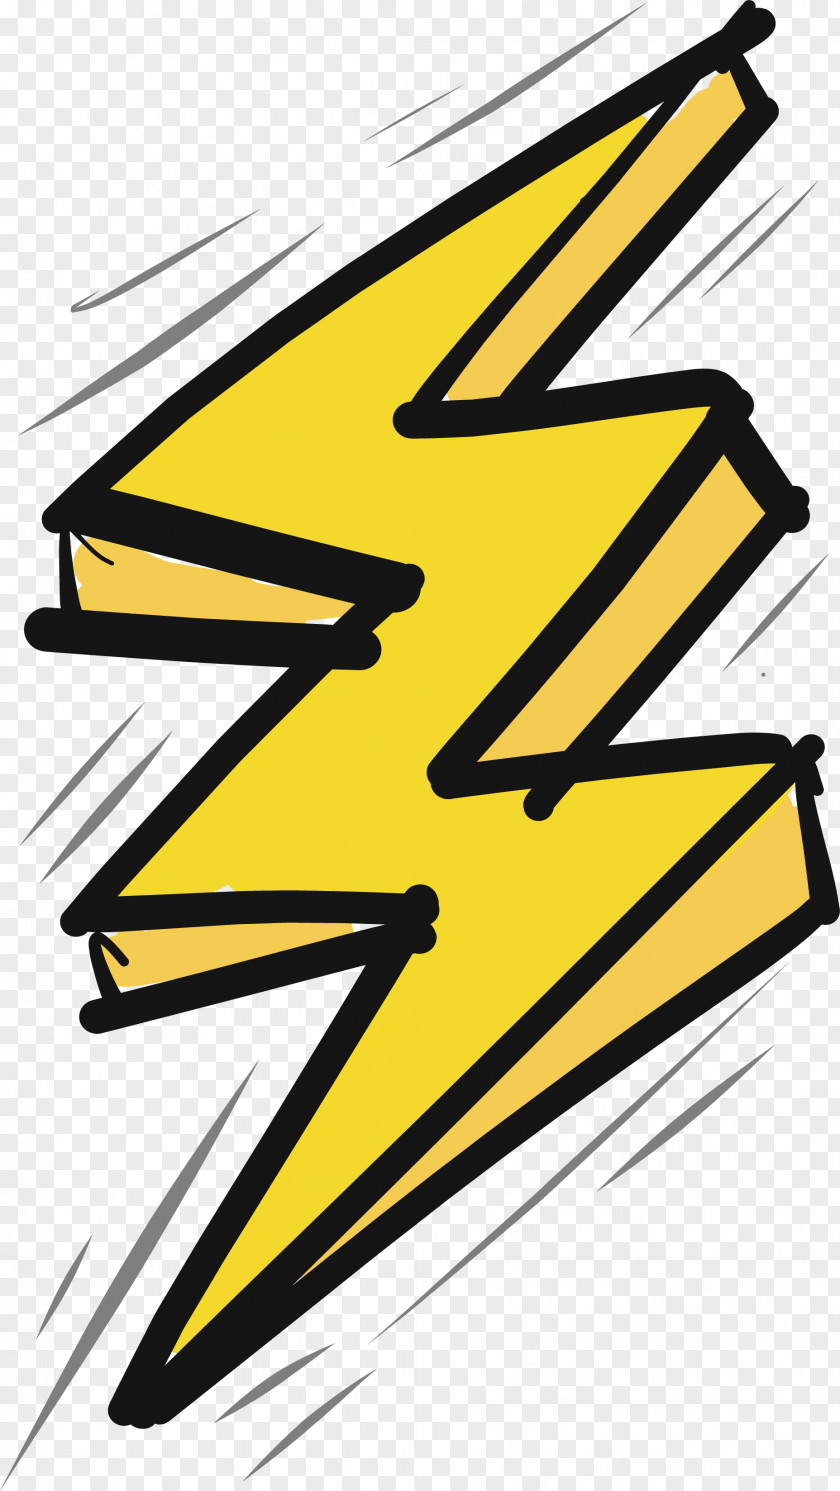 Twists And Turns Of Lightning Thunder Euclidean Vector Clip Art PNG